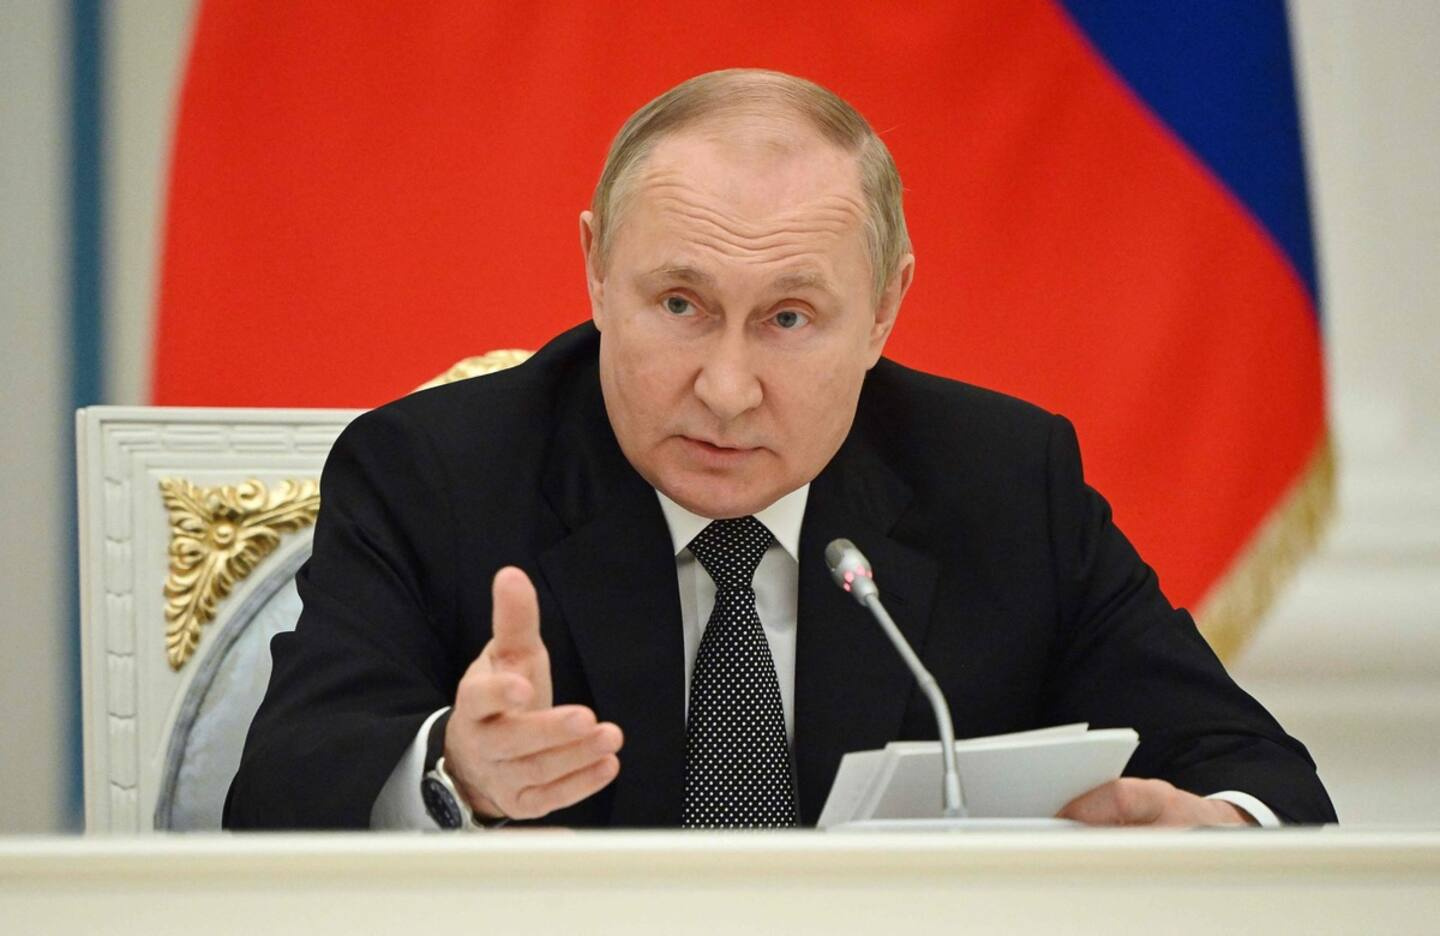 Food crisis: Accusations against Moscow are “baseless”, says Putin